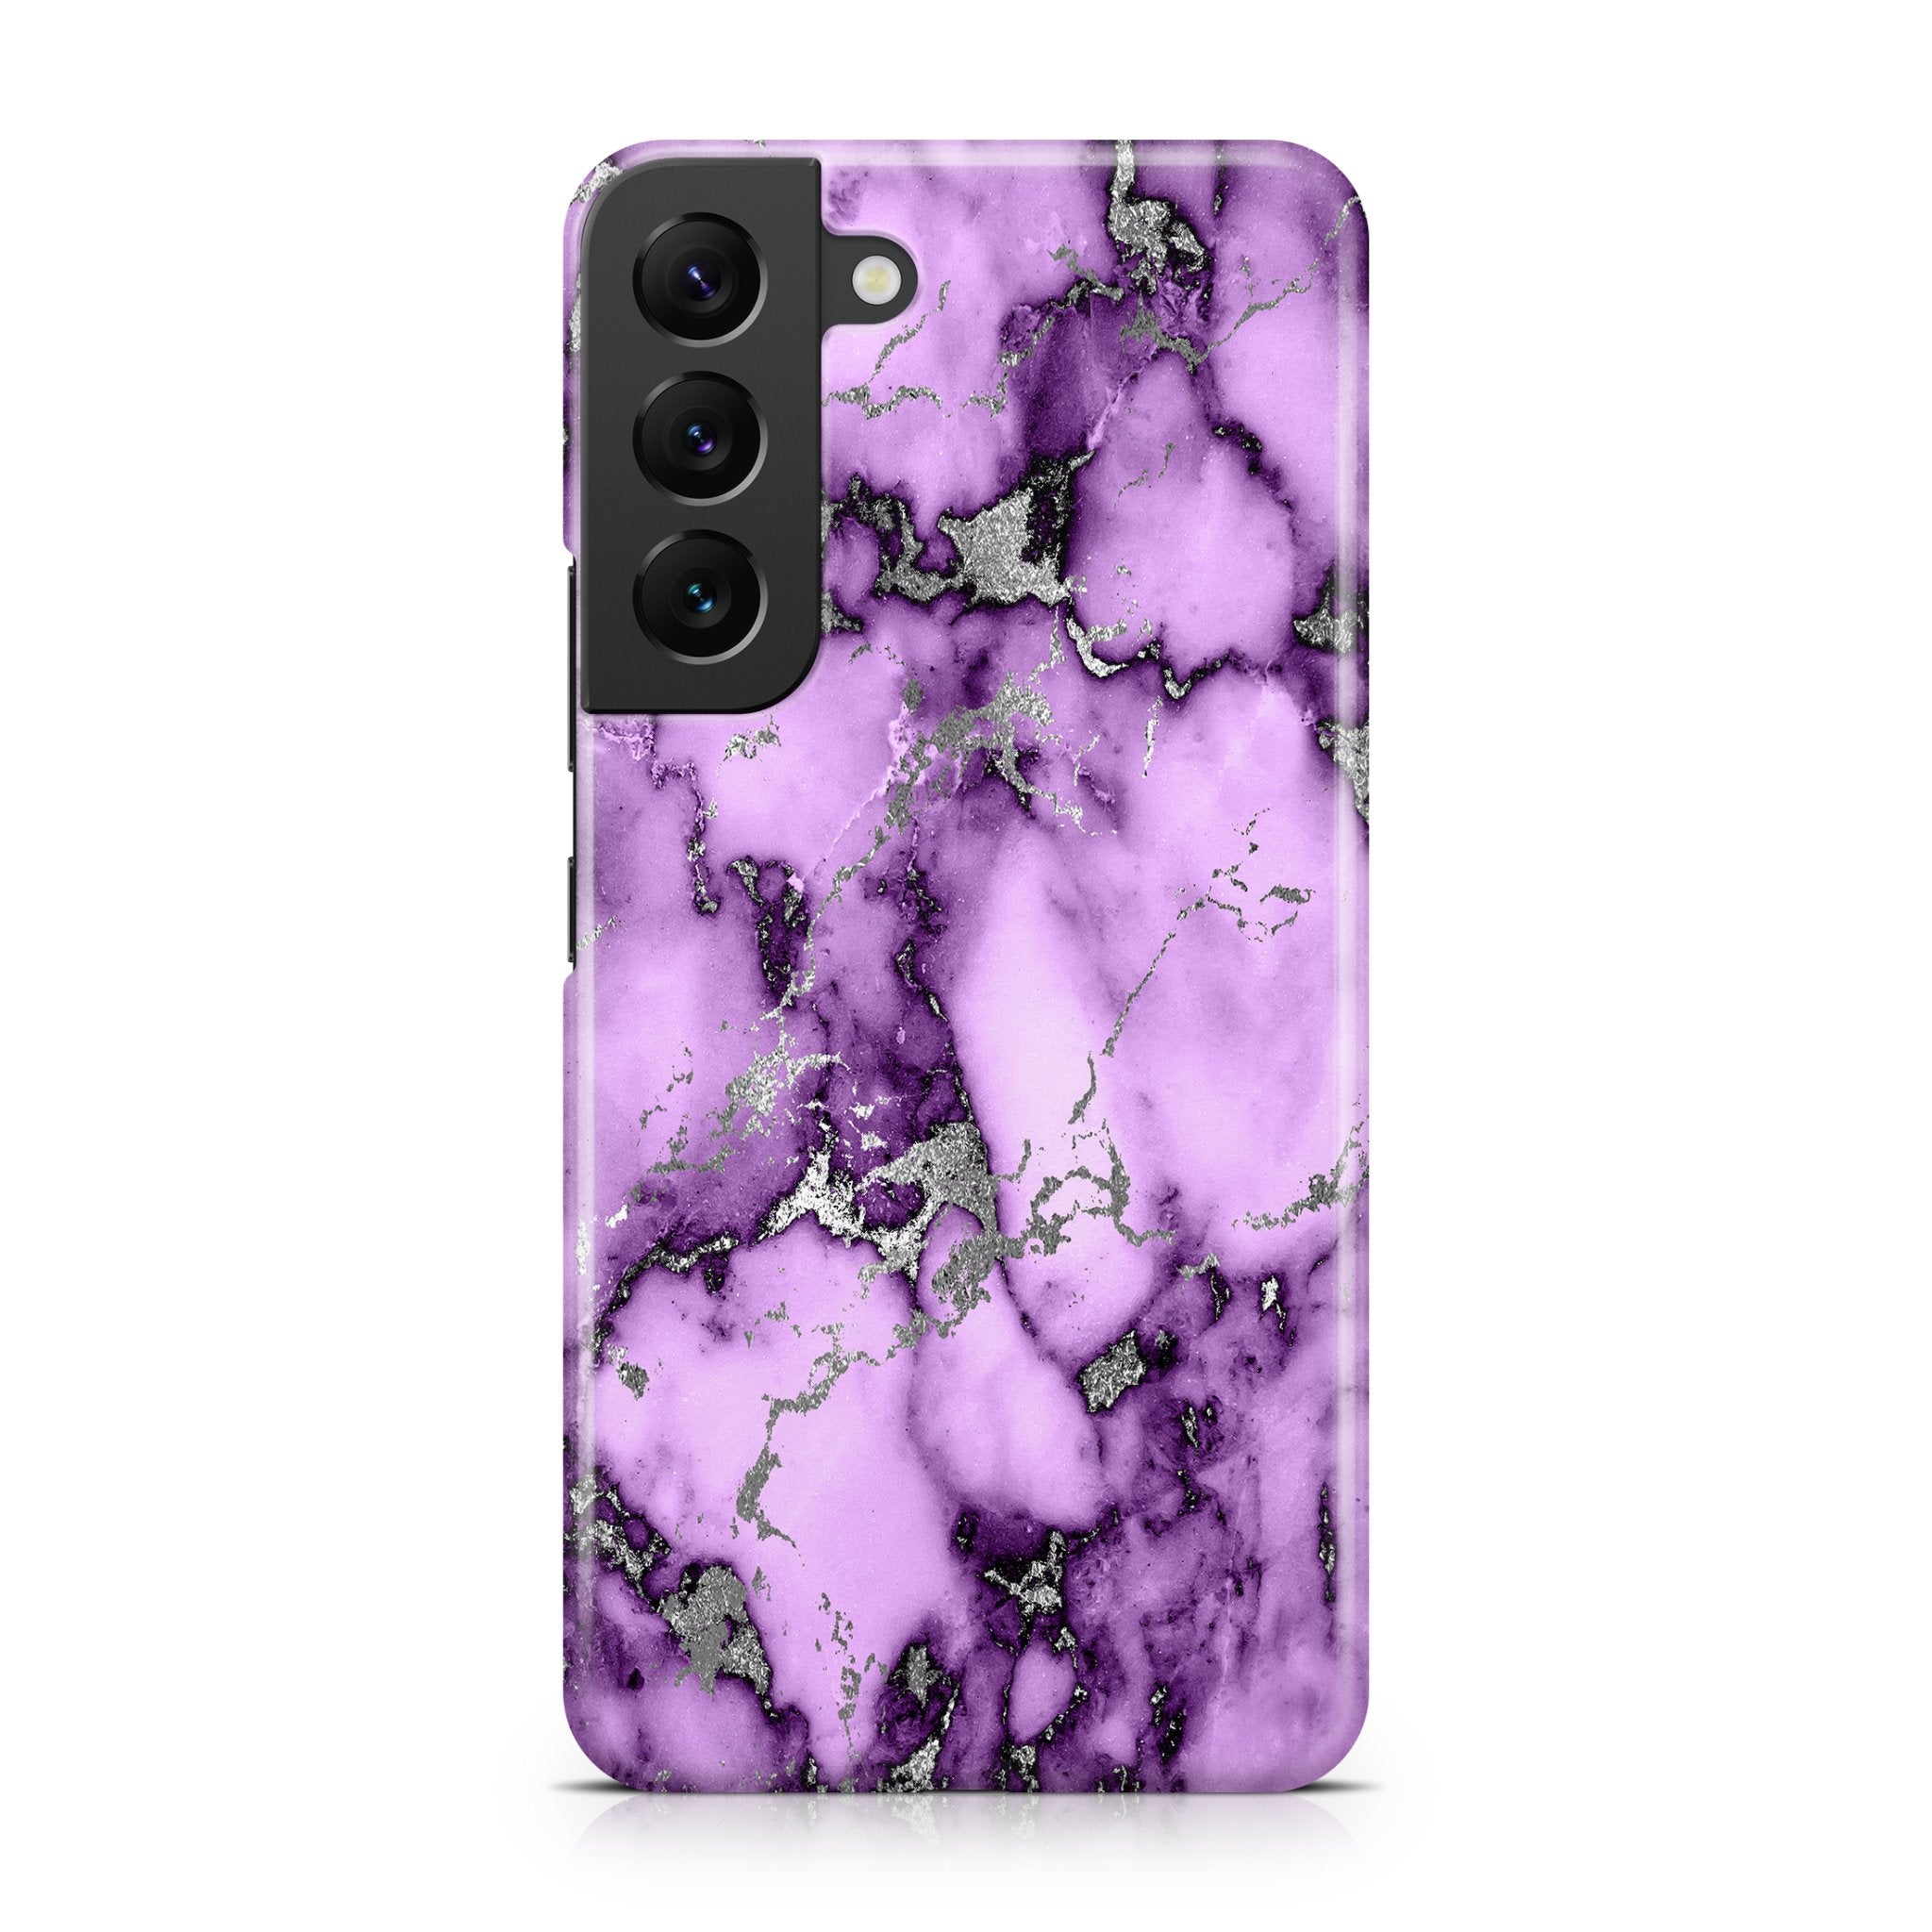 Purple & Silver Marble III - Samsung phone case designs by CaseSwagger